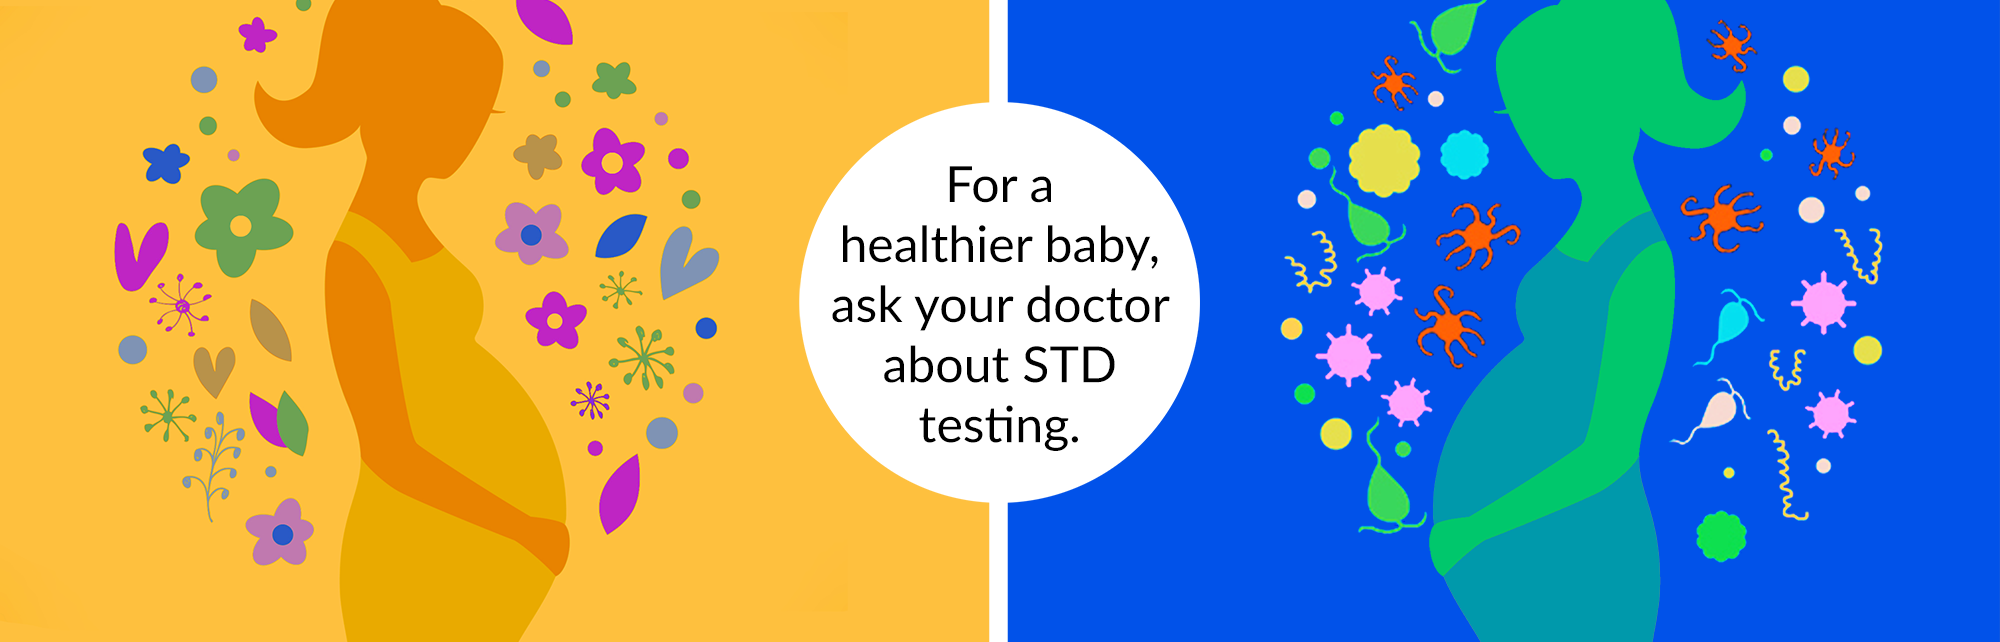 For a healthier baby, ask your doctor about STD testing.